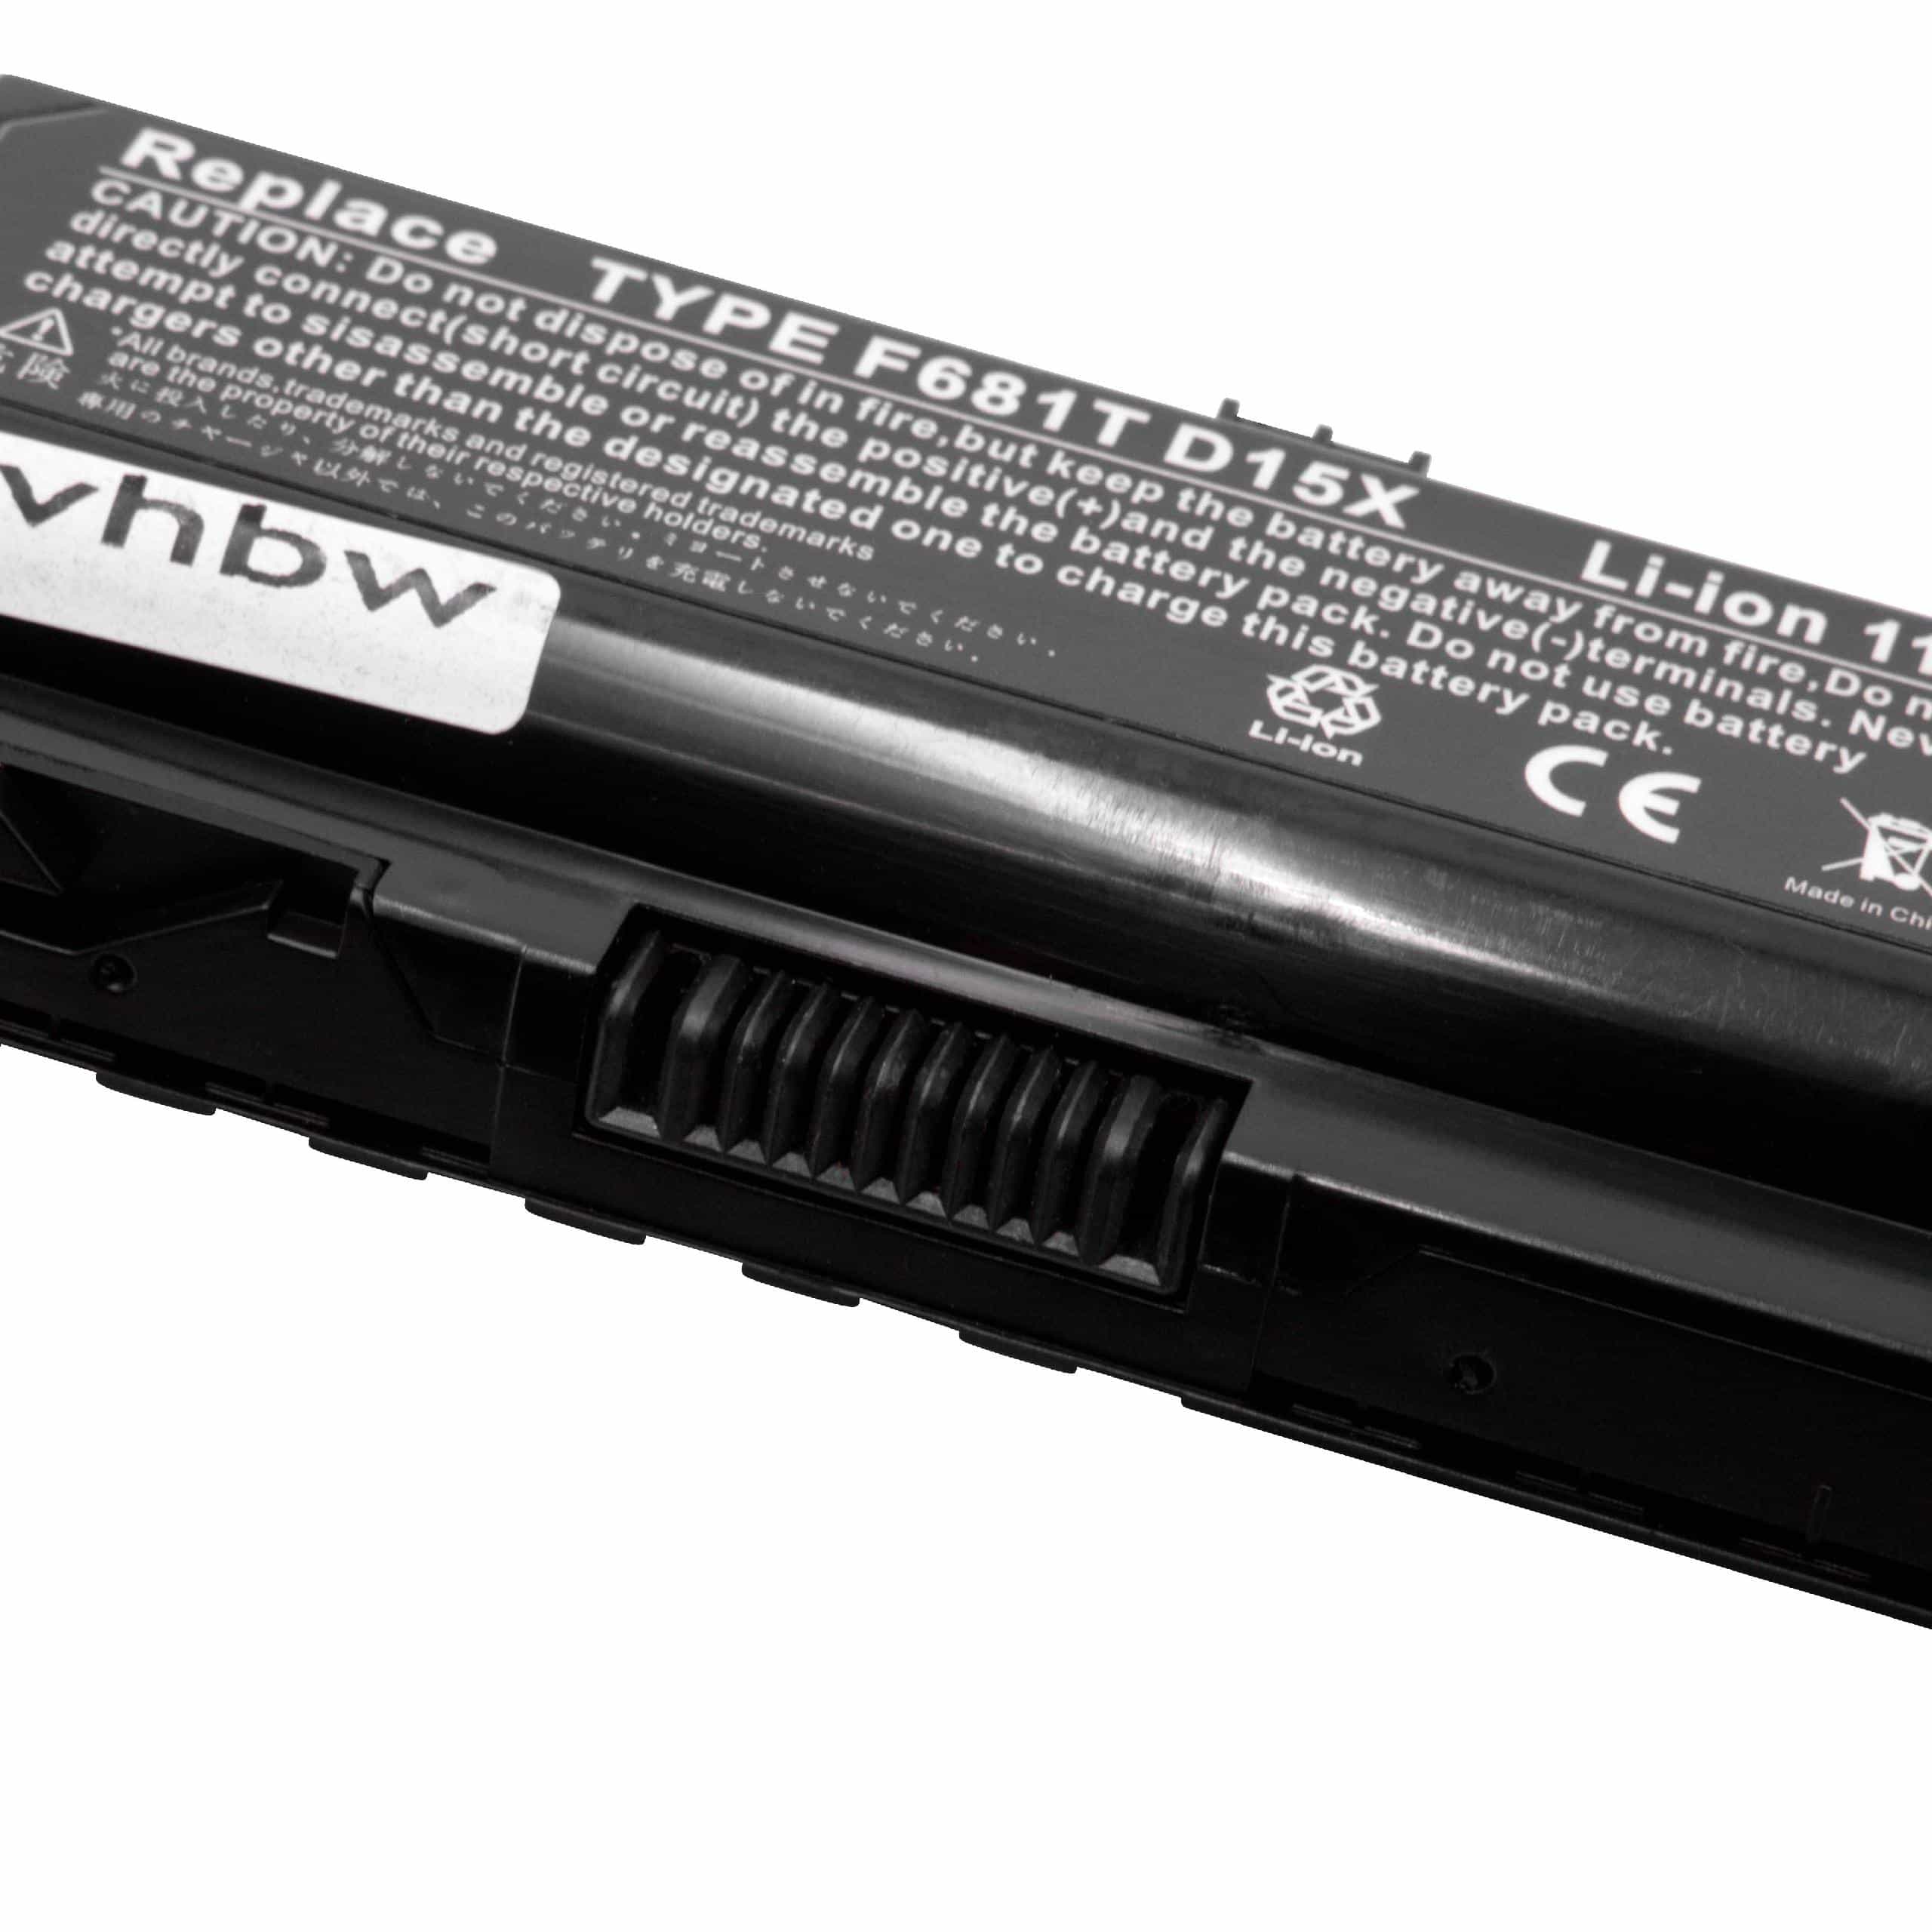 Notebook Battery Replacement for Dell 0HC26Y, 0F681T, 0D951T, 312-0207, 0W3VX3 - 5200mAh 11.1V Li-Ion, black